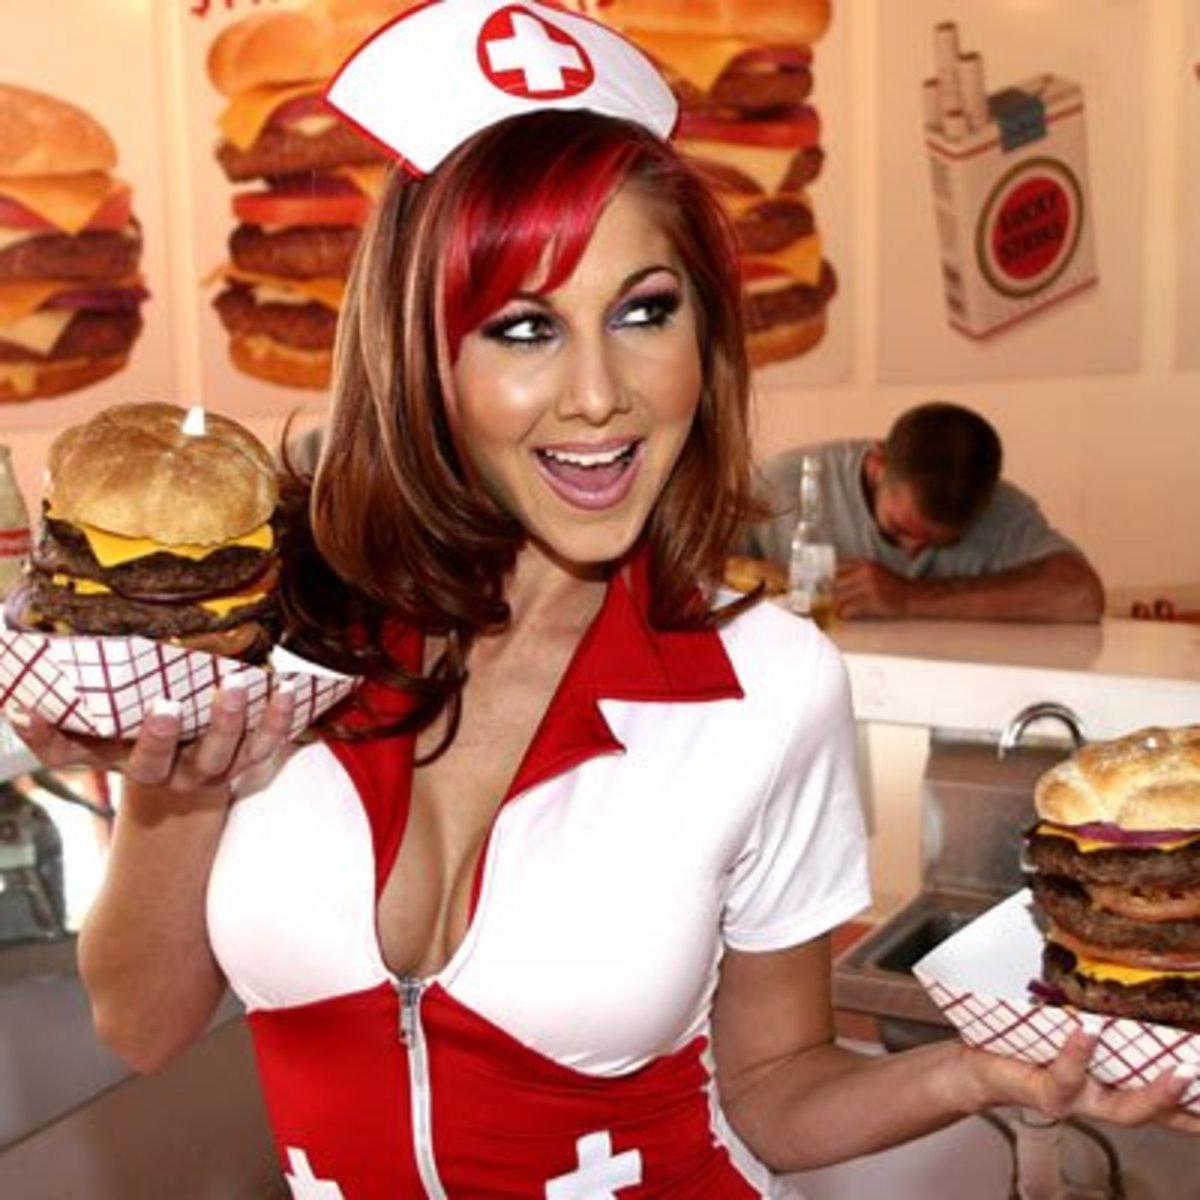 A server at the Heart Attack Grill.